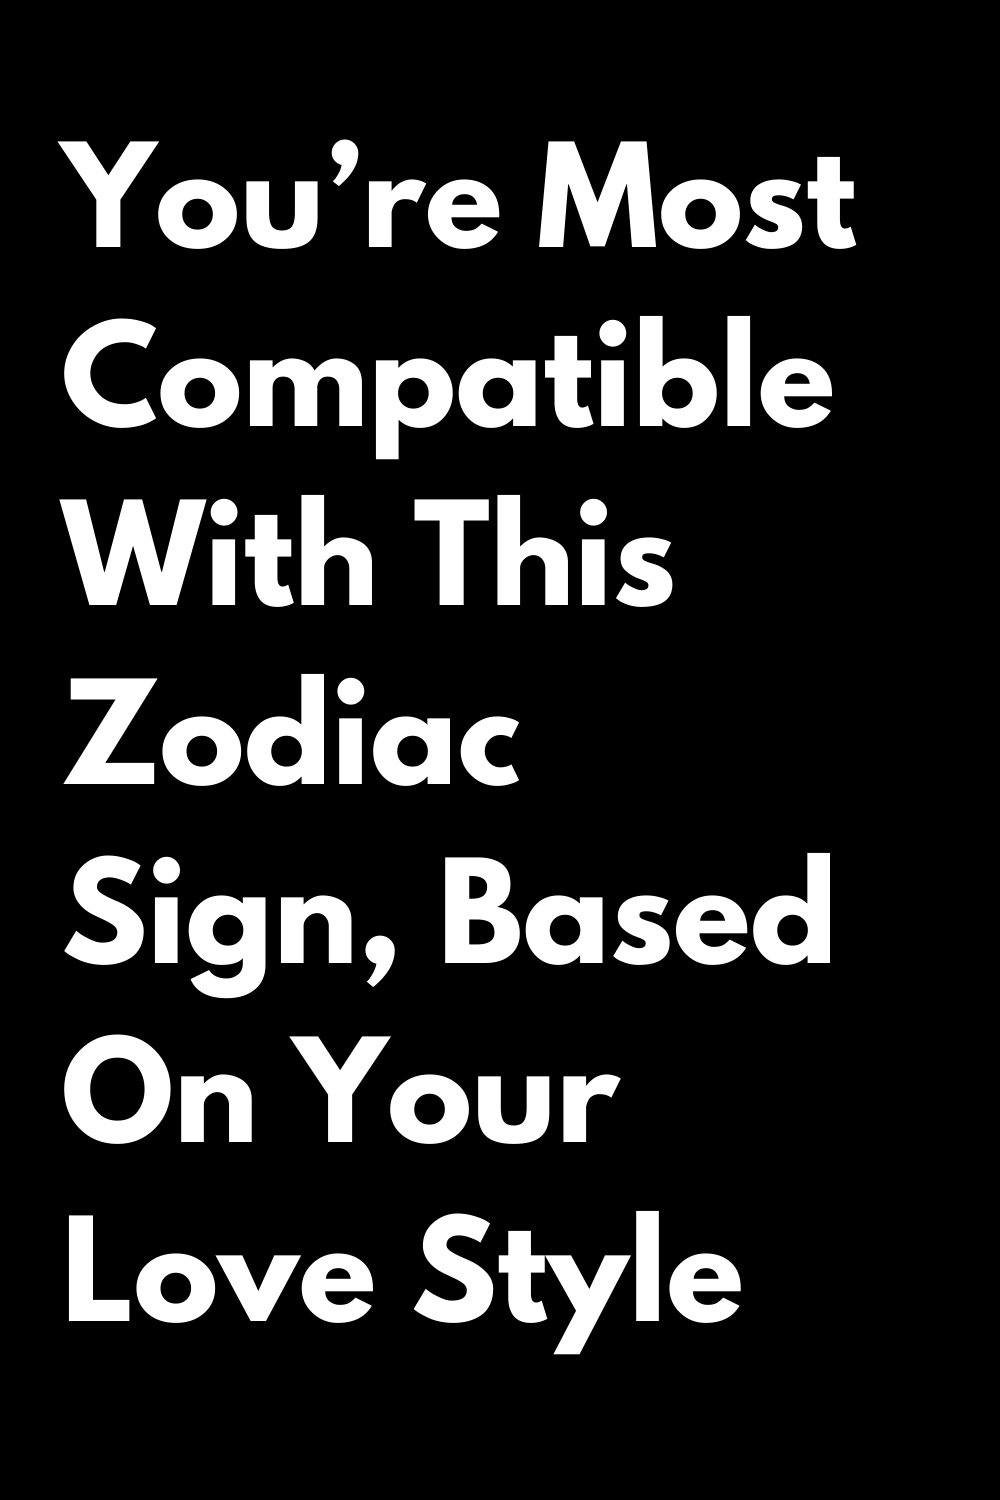 You’re Most Compatible With This Zodiac Sign, Based On Your Love Style